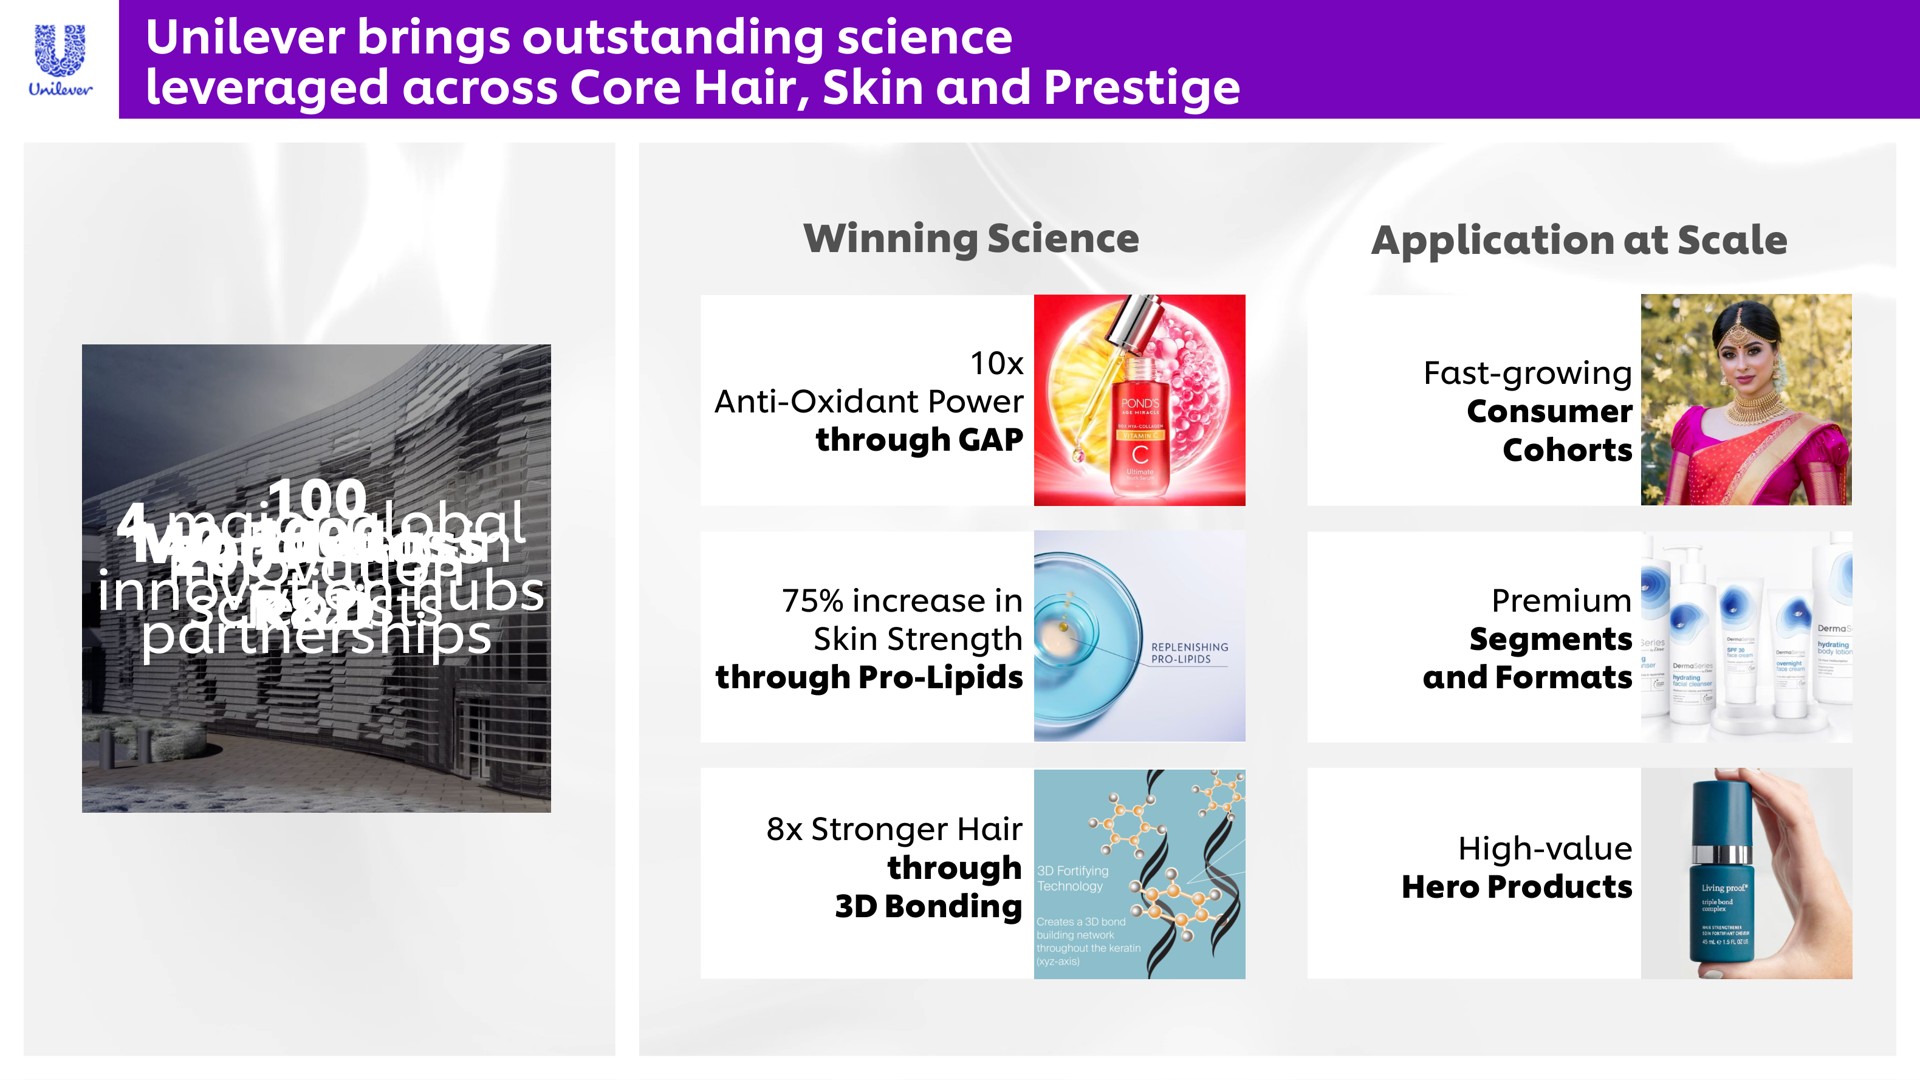 brings outstanding science leveraged across core hair skin and prestige major global patents in world class innovation innovation hubs scientists partnerships winning through do | Unilever